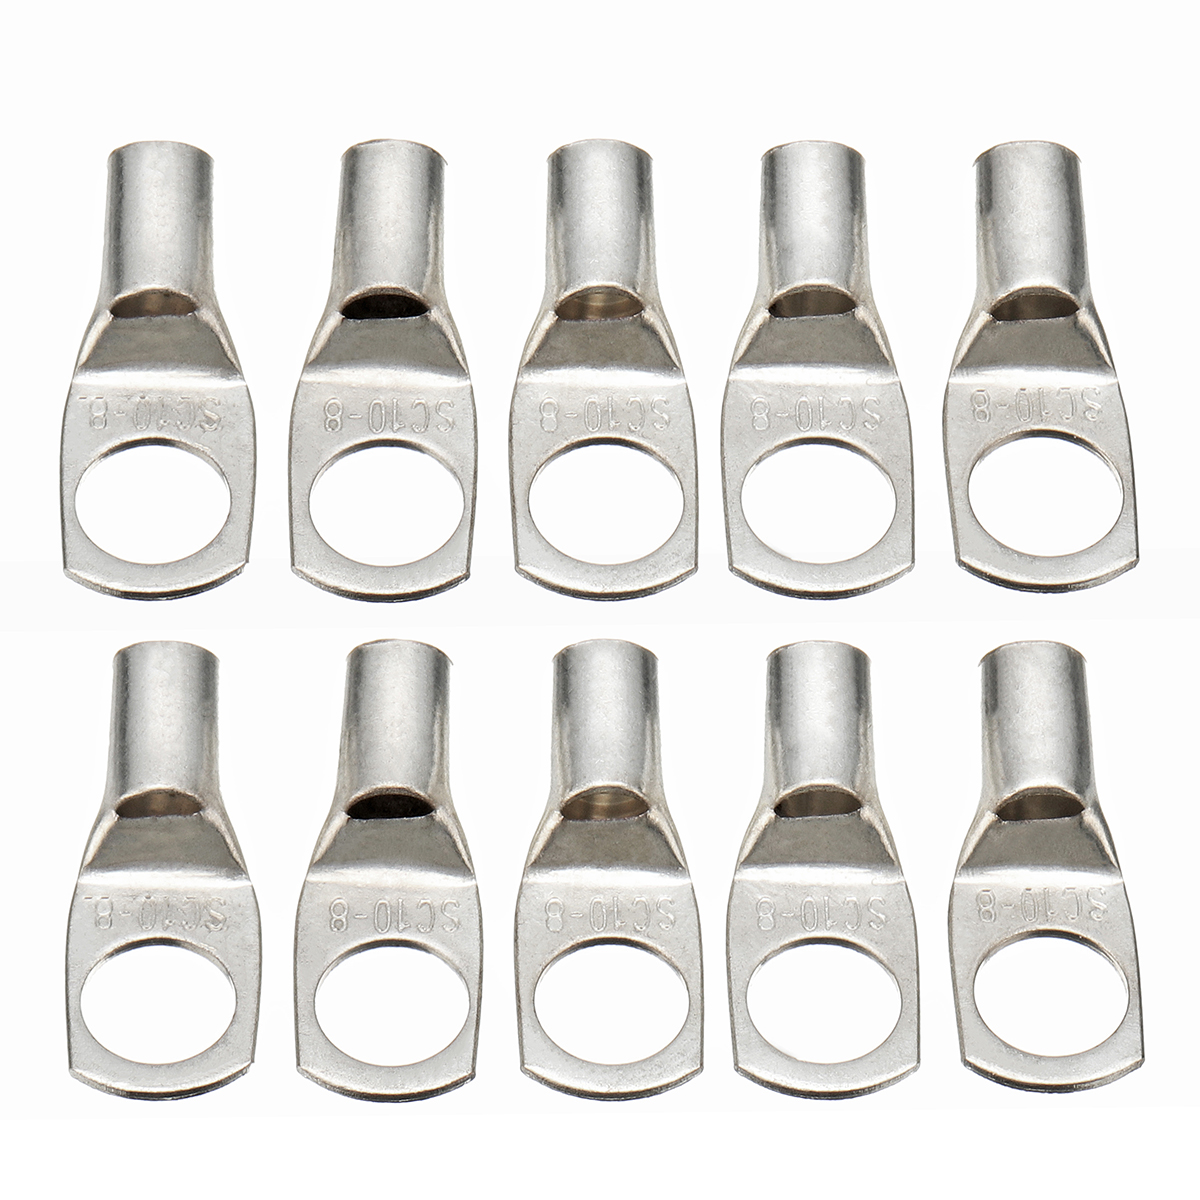 

10 Pcs Copper Cable Terminal Lugs Eyelets Ring Crimp Terminals Connectors Wiring Connectors kit